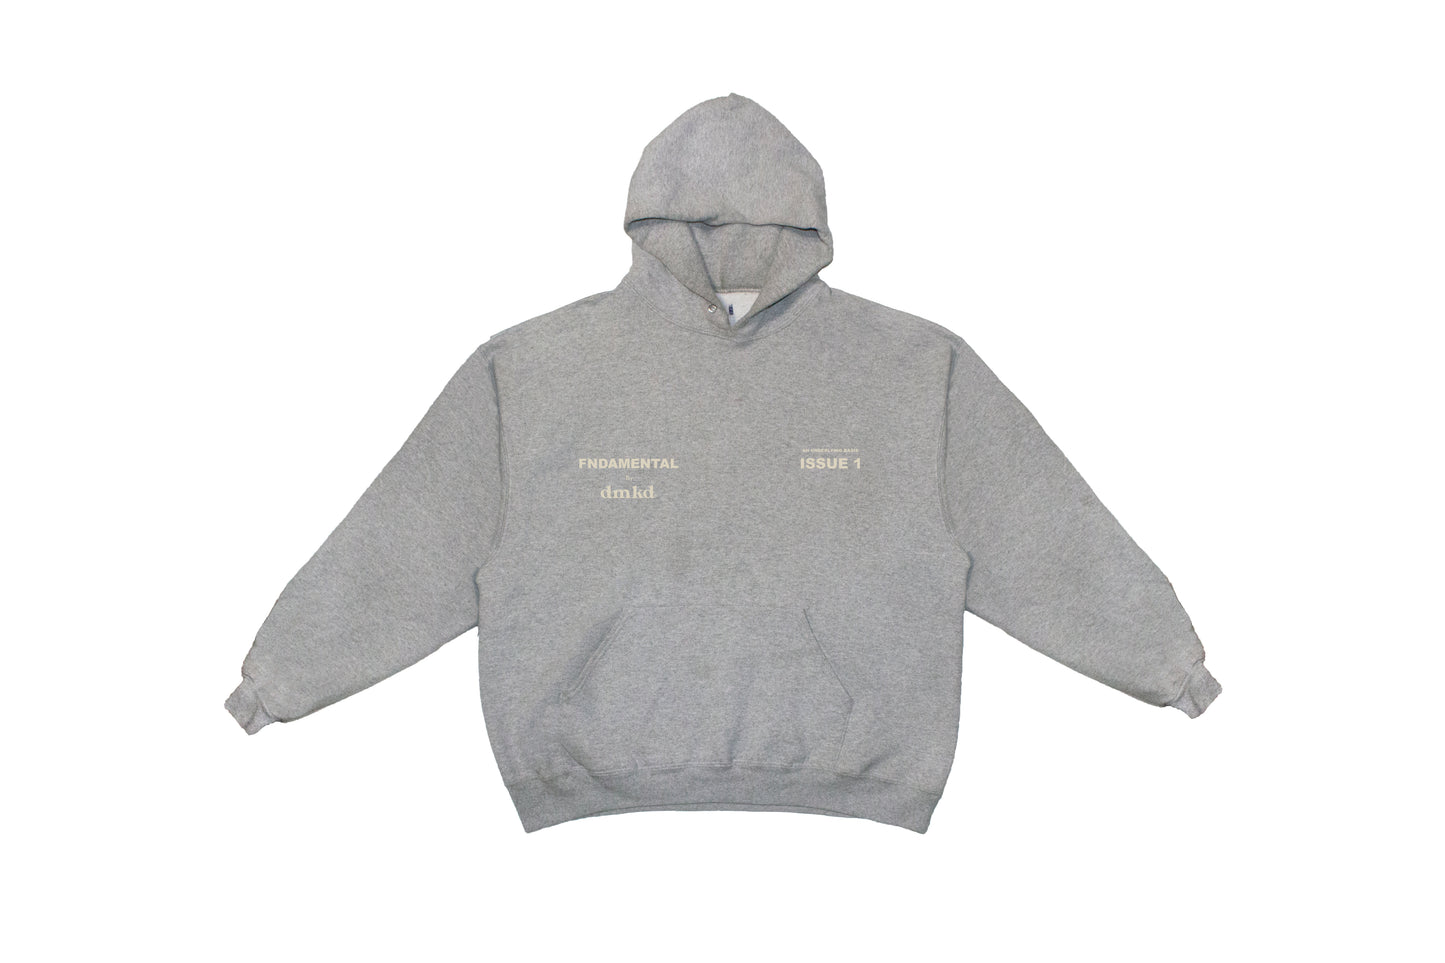 Contact Hoodie - Gray